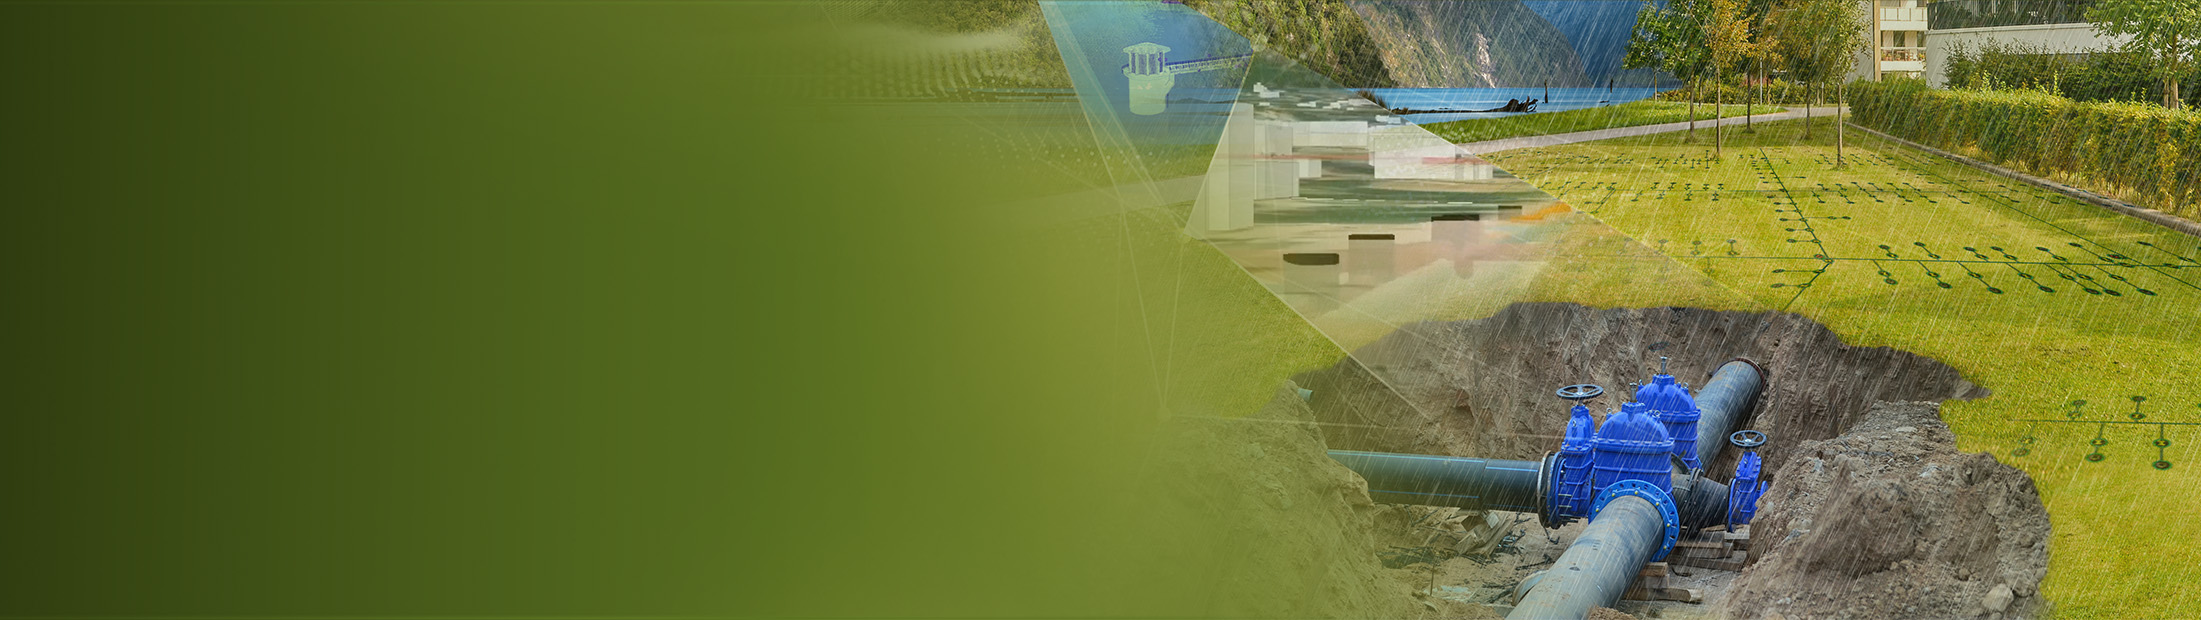 A blue utility pipe in a ditch surrounded by greenery overlaid with an asset map and a conceptual image of a group of structures